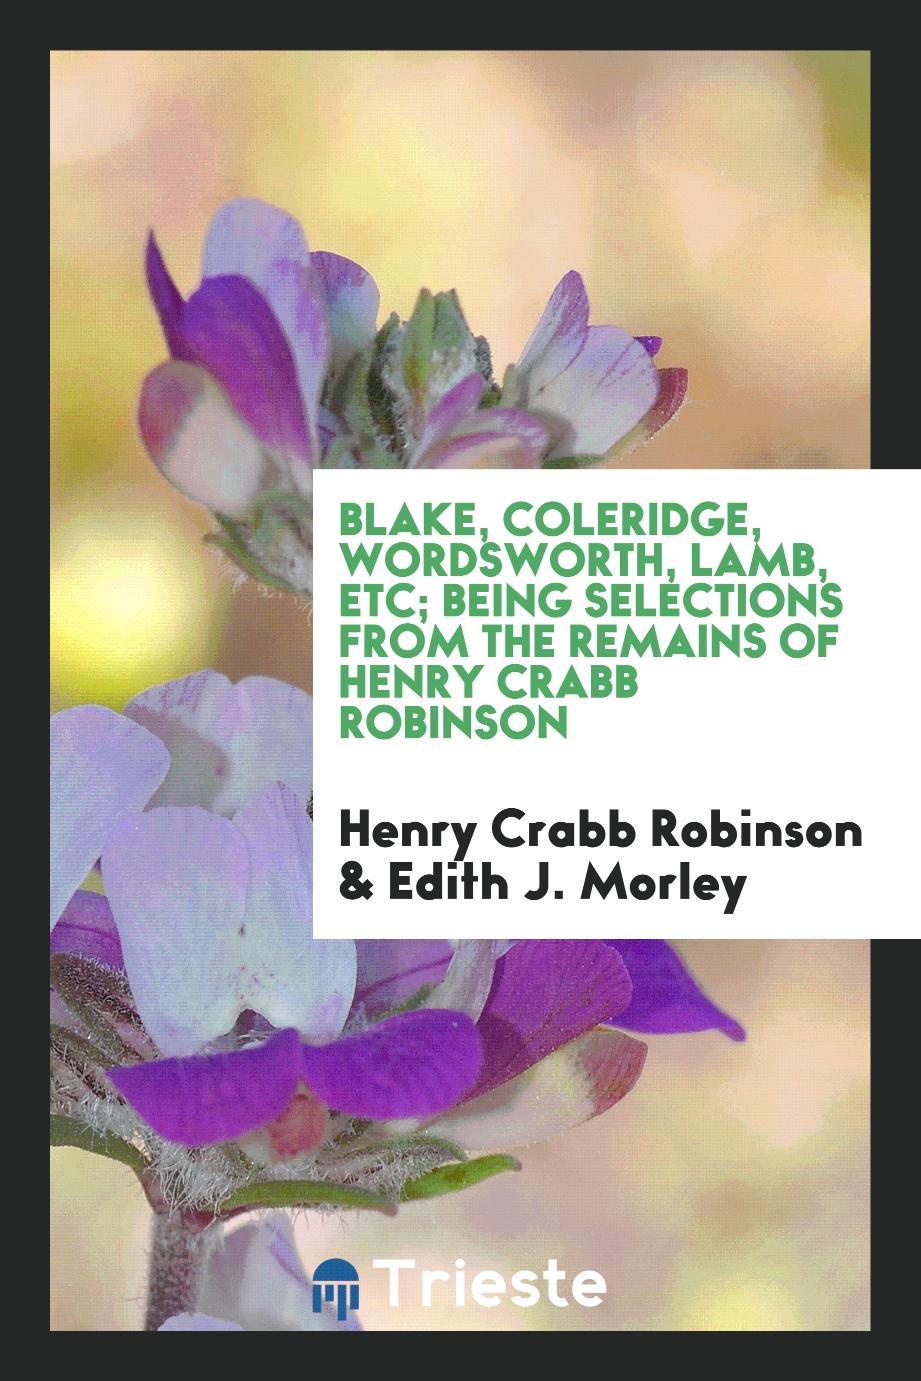 Blake, Coleridge, Wordsworth, Lamb, etc; being selections from the remains of Henry Crabb Robinson